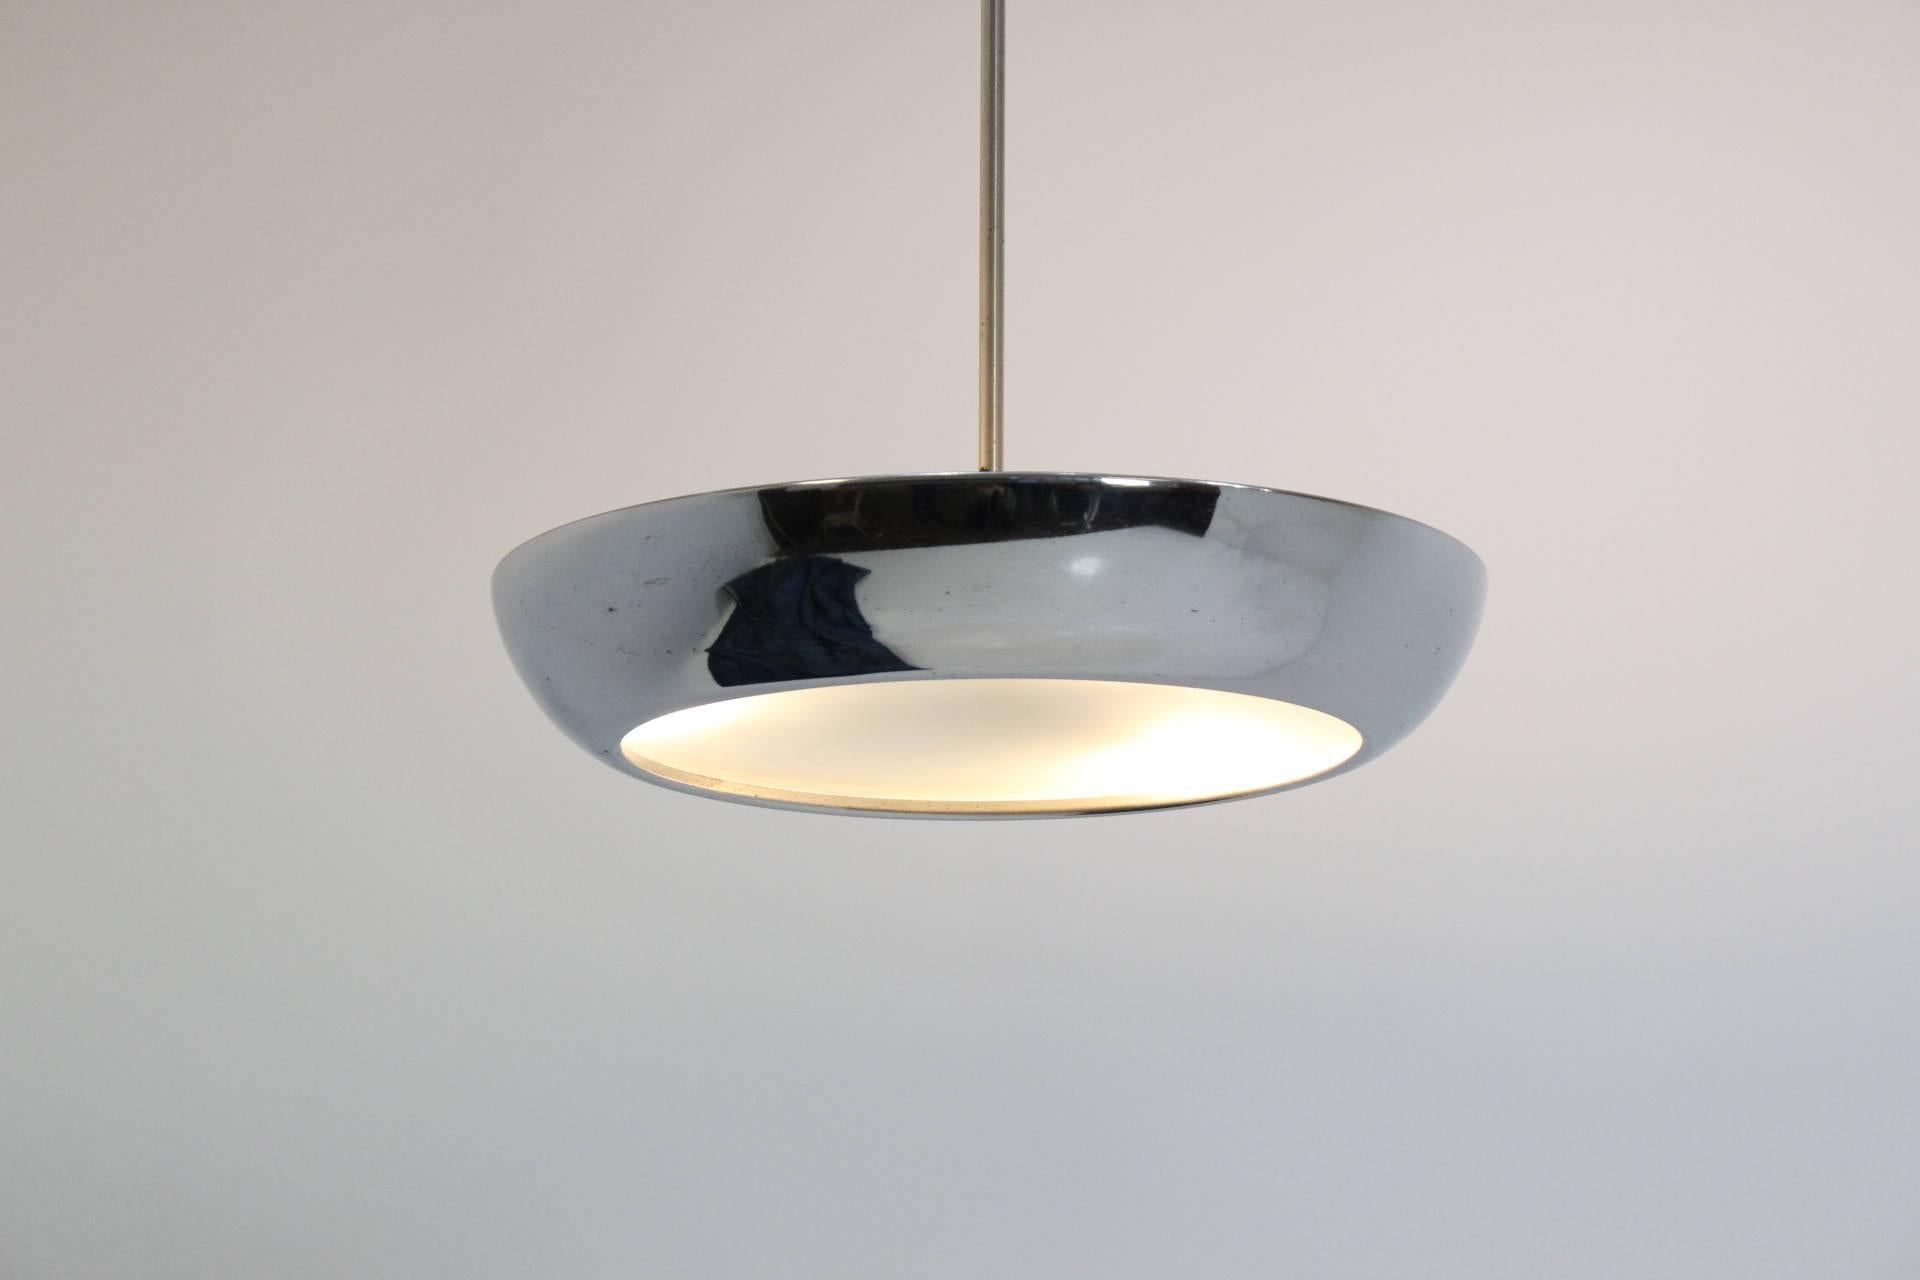 Chrome and glass pendant lamp by Josef Hurka for Napako made in Czech Republik
Pendant lamp have three bakelite E27 lampholders
The lamp has new wires and is in excellent condition.